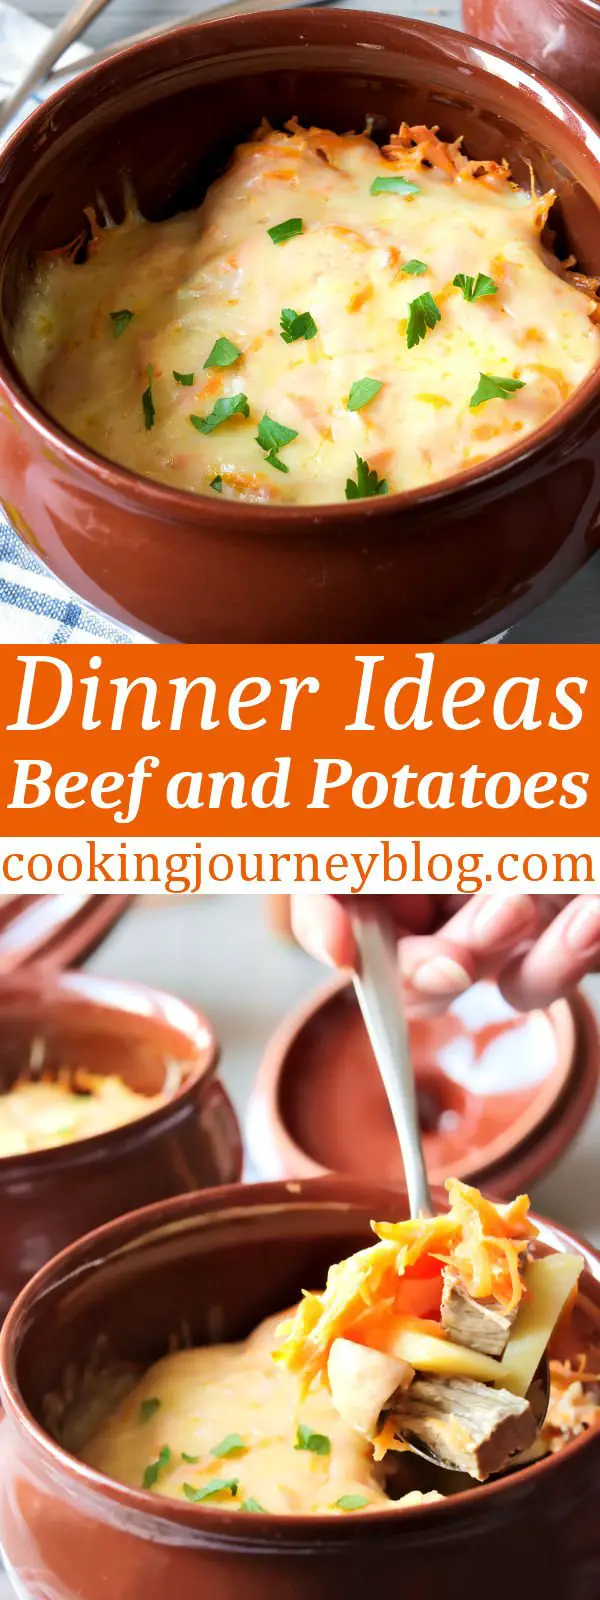 Yes to beef and potatoes for dinner! Simple, filling and delicious meal, baked in clay pot. You will have easy dinners with this idea. #cookingjourney #beef #dinner